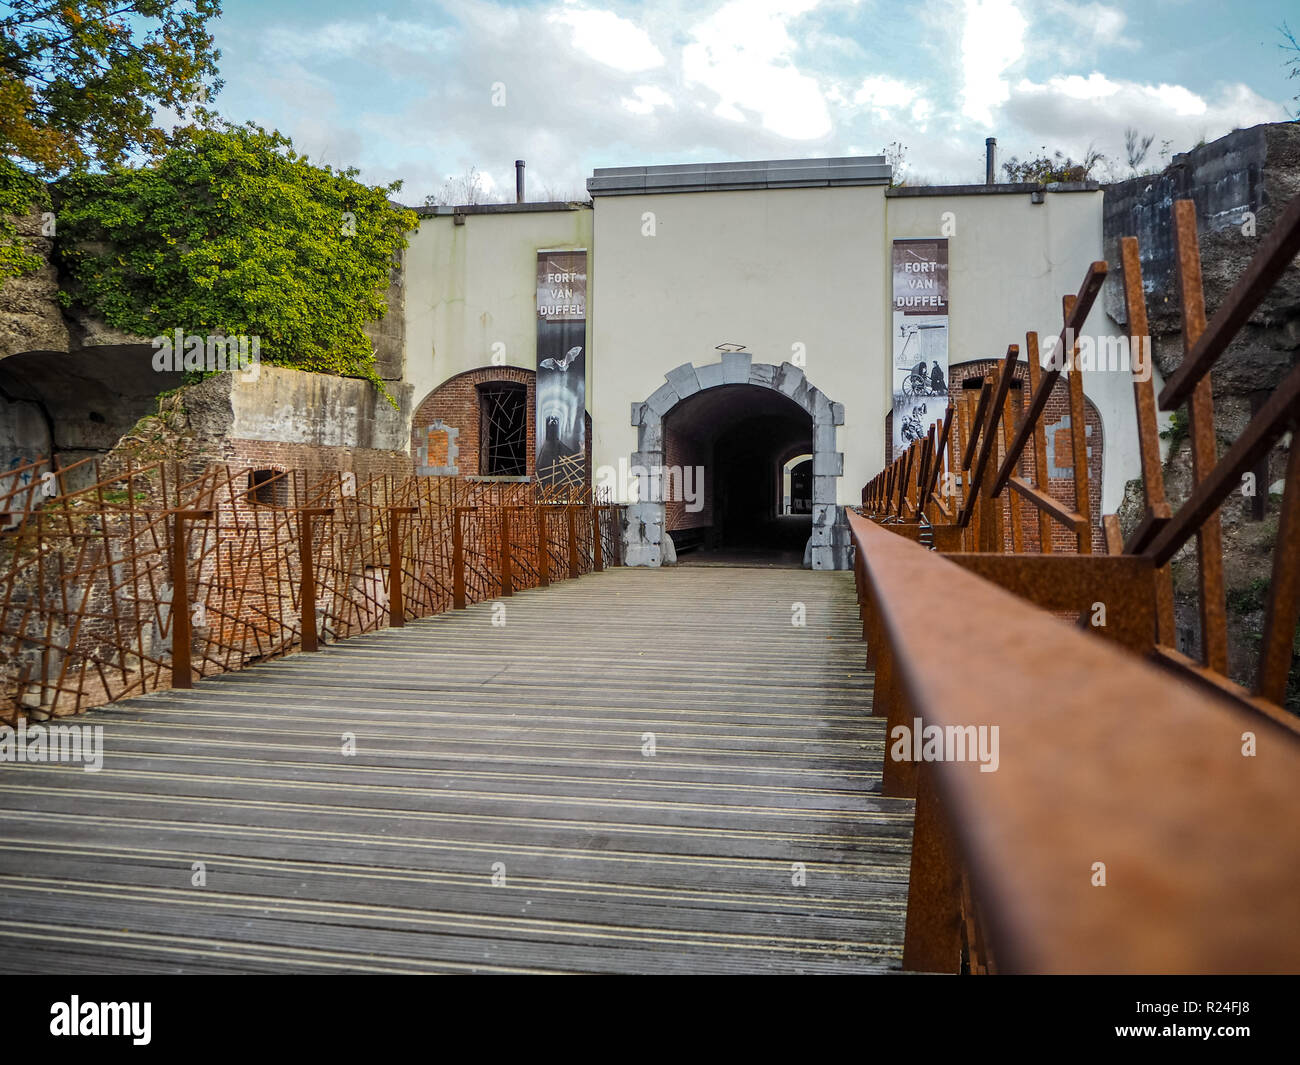 The entrance to the publicly accessible Fortress of Duffel near Mechelen, Belgium Stock Photo